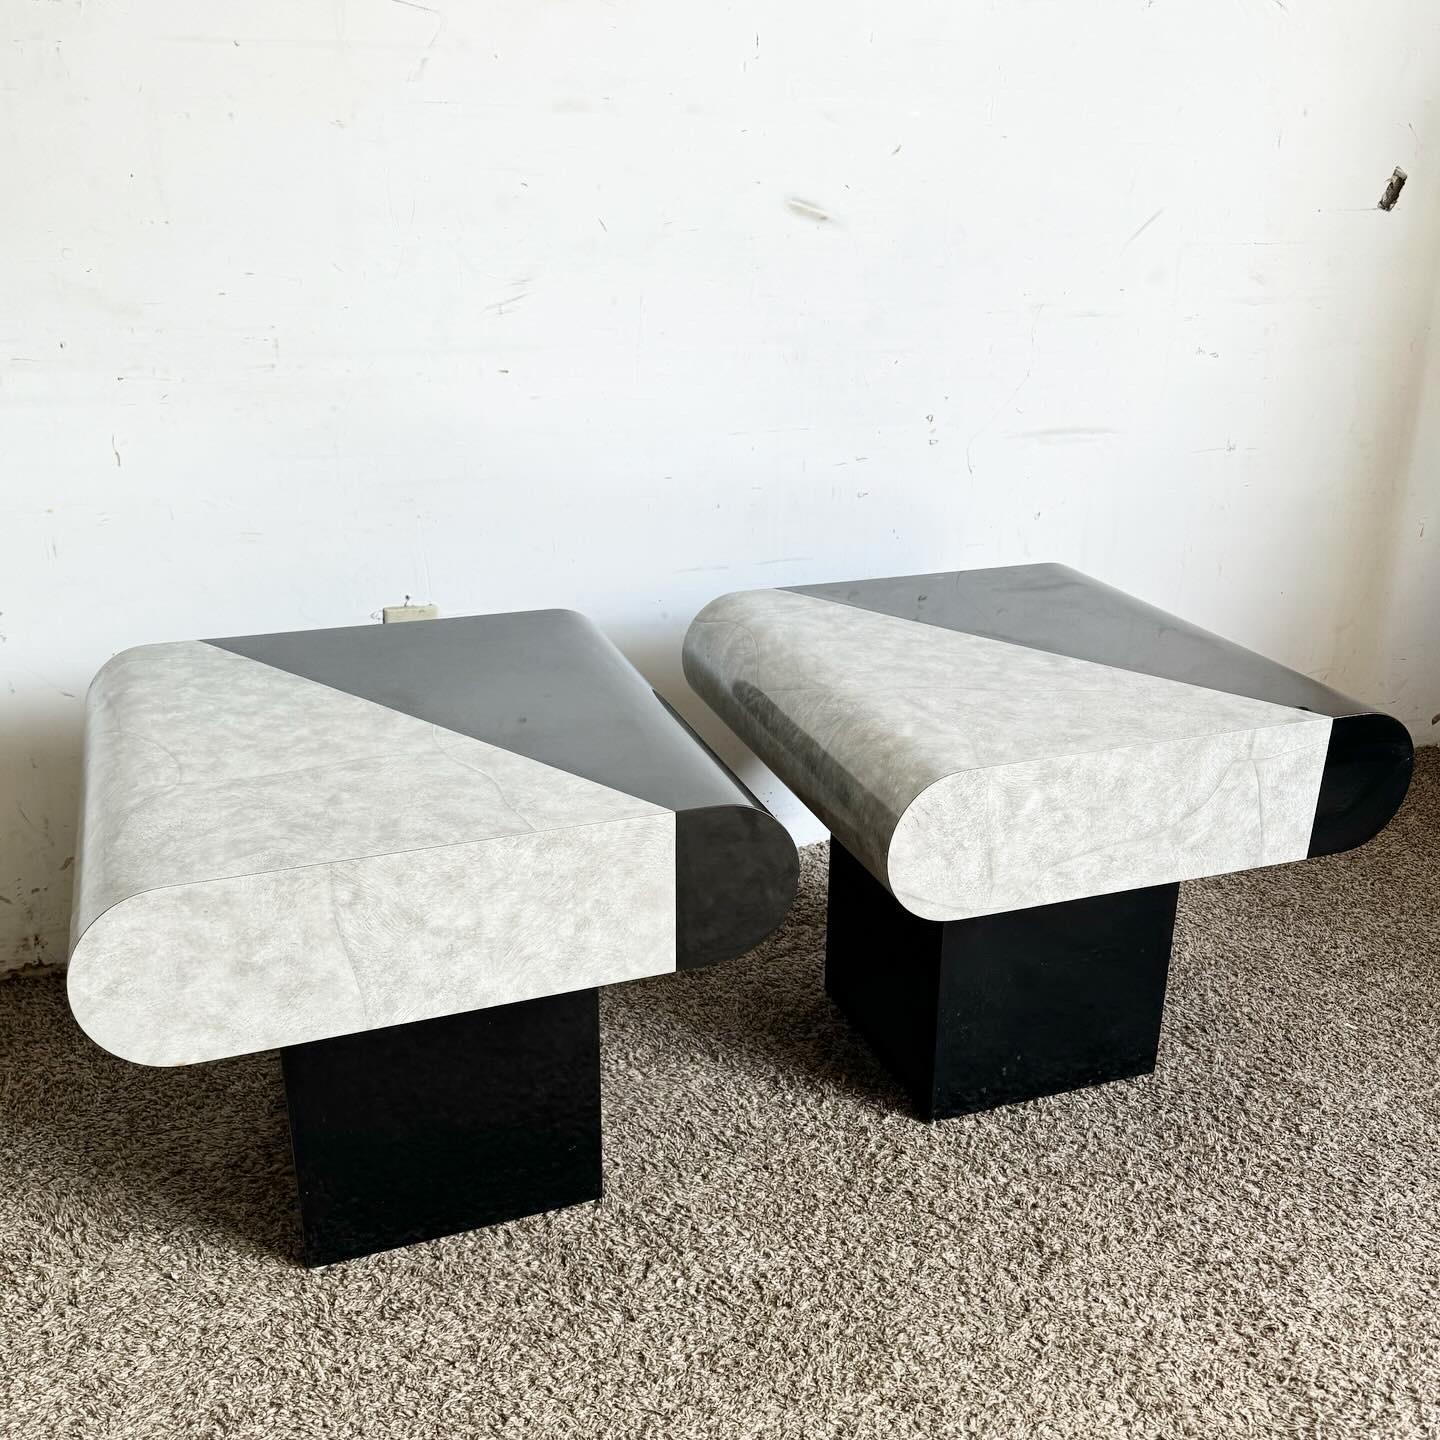 Late 20th Century Postmodern Black Gloss and Faux Stone Laminate Bullnose Side Tables - a Pair For Sale